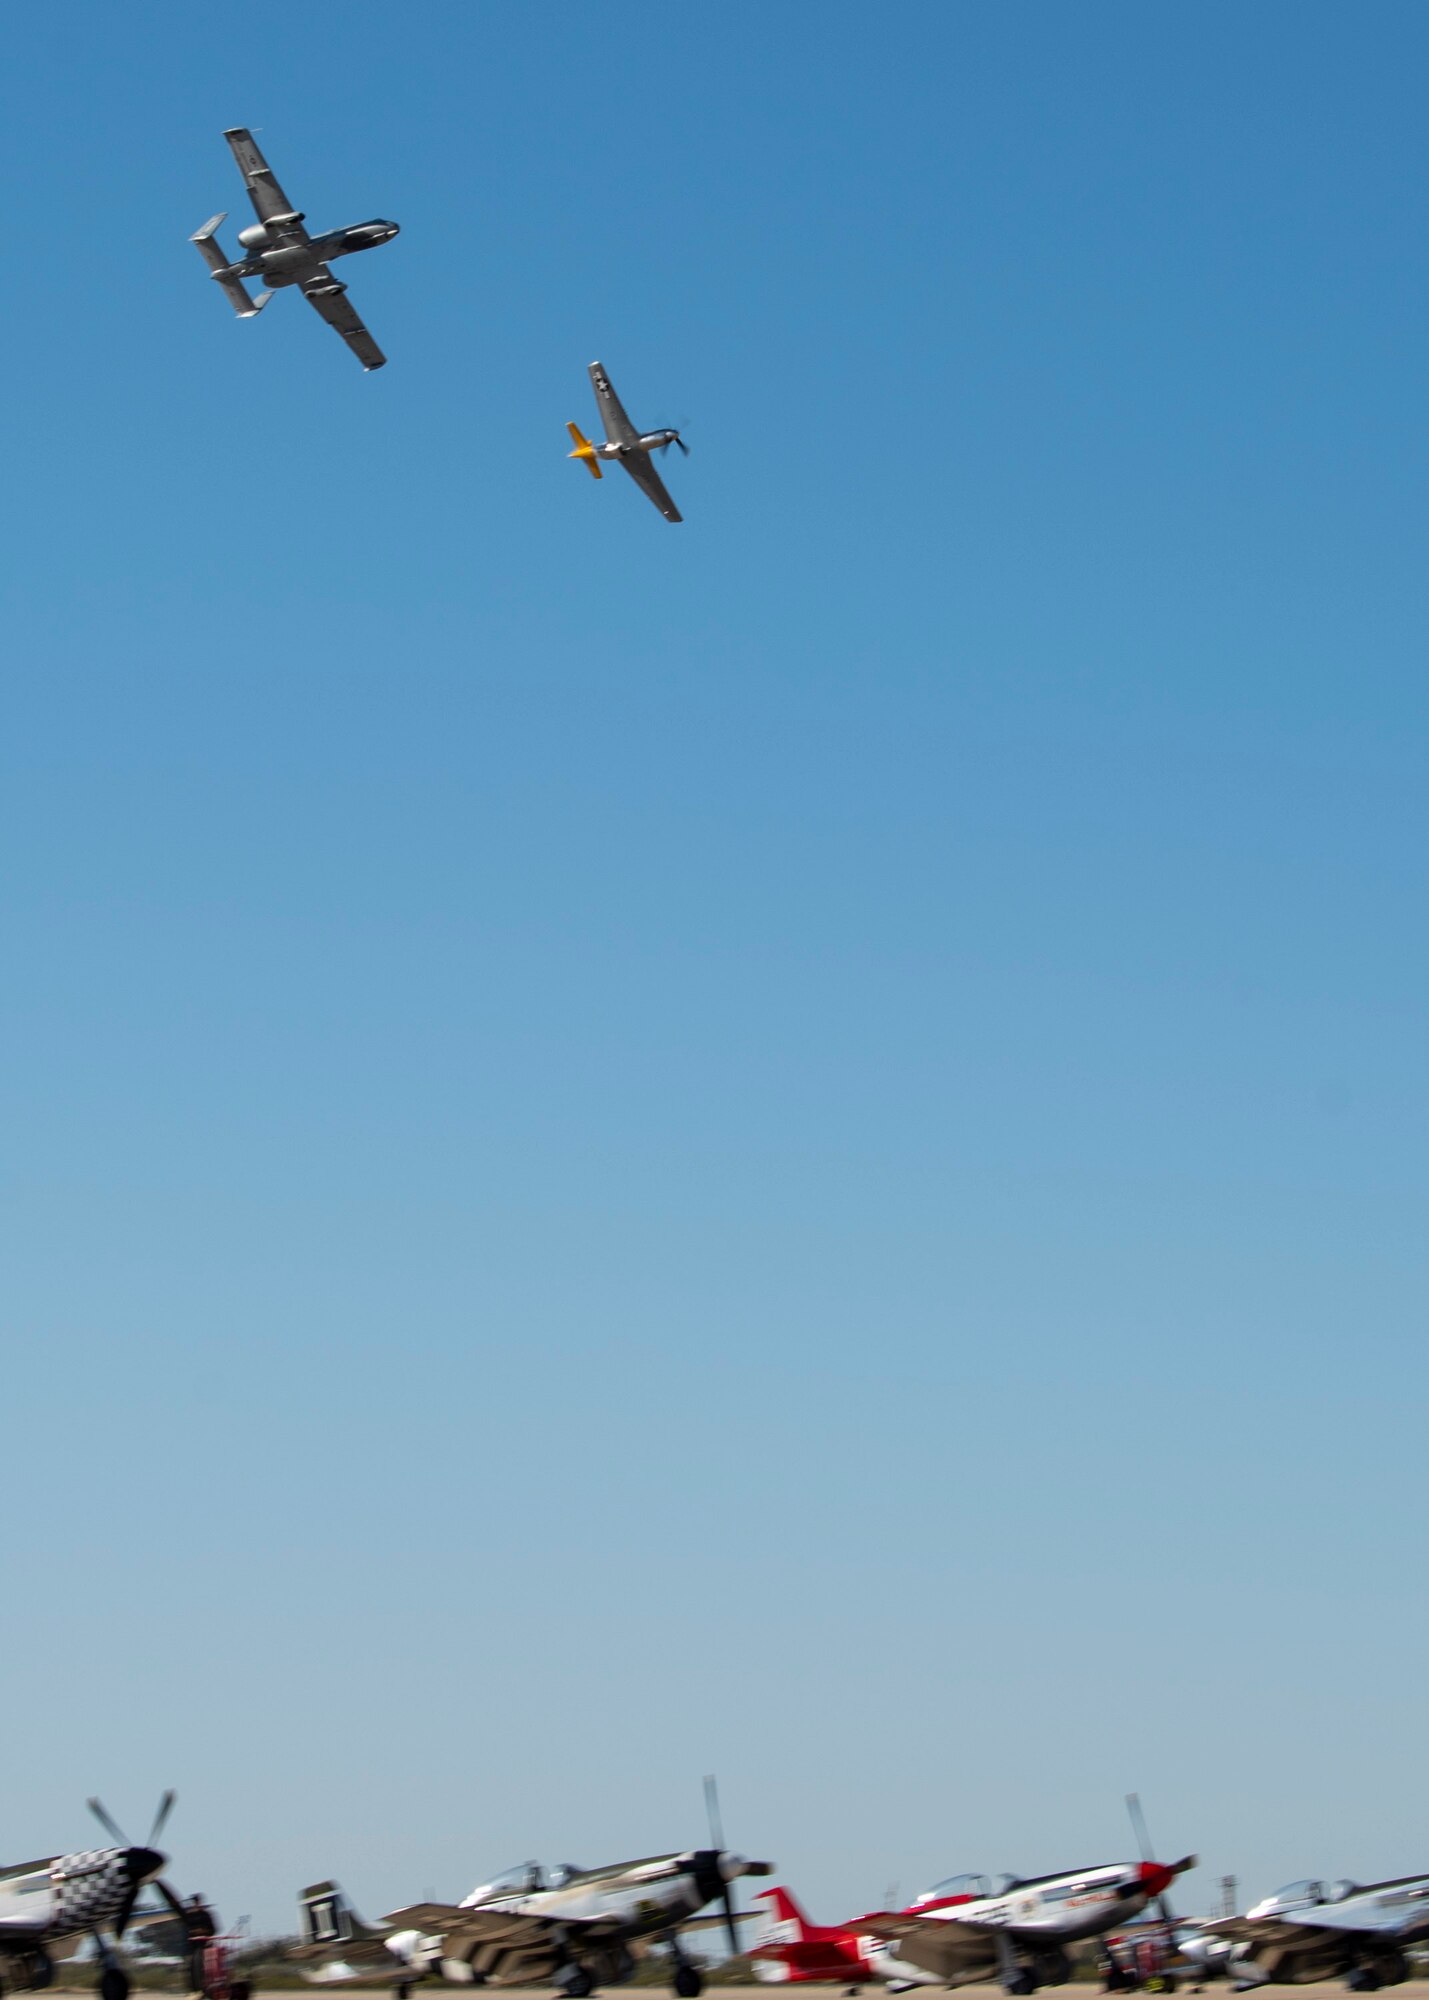 Two planes flying.